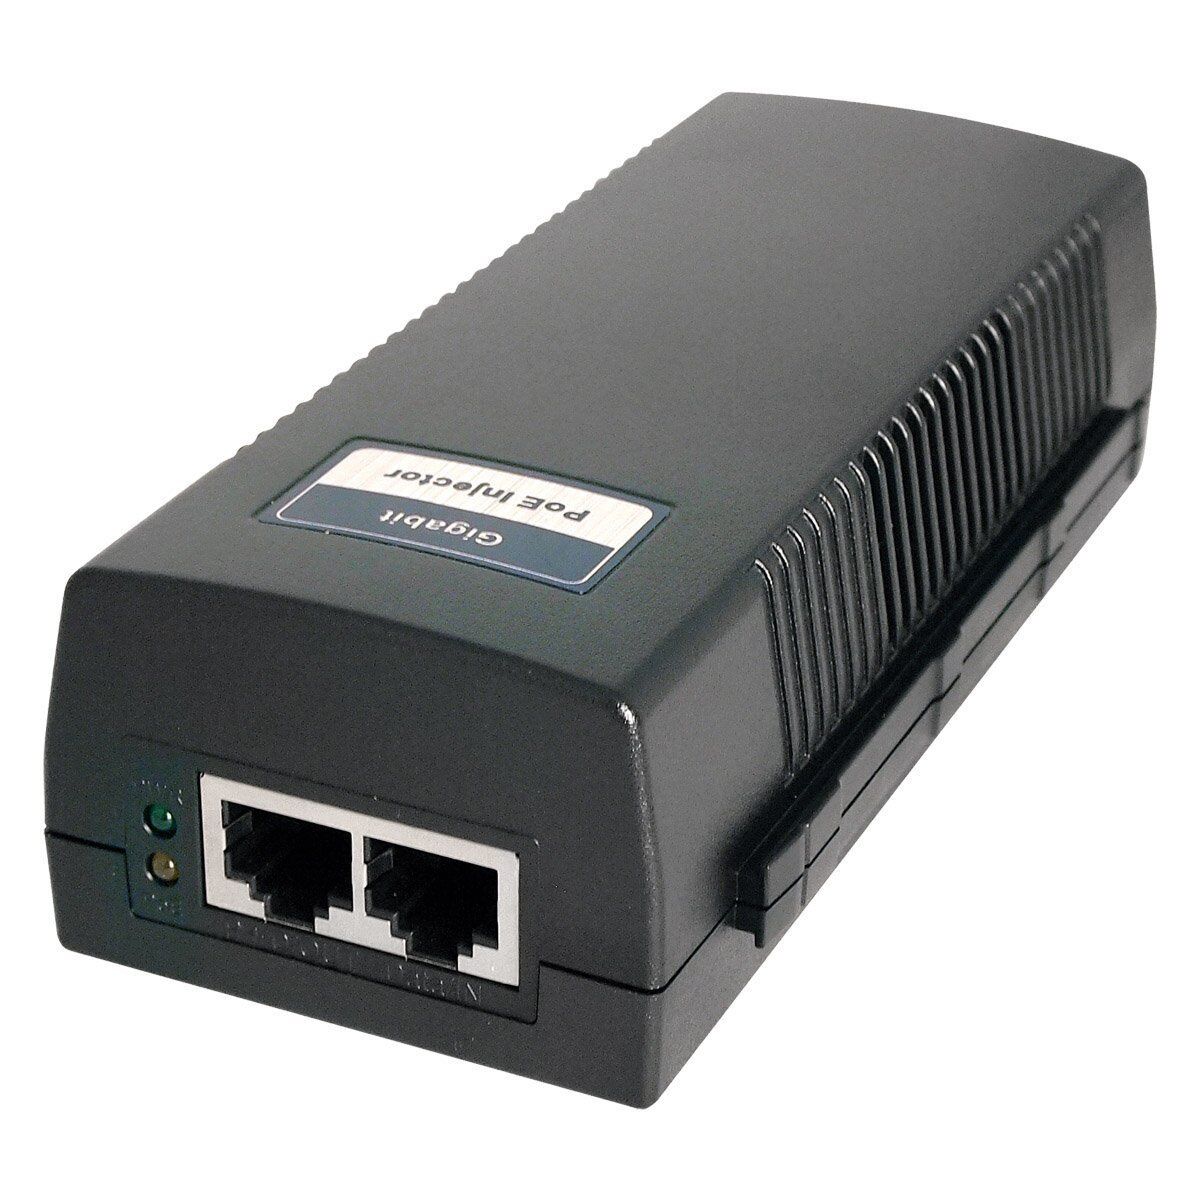 30W High Power Gigabit PoE Injector, IEEE 802.3at/af Compliant, PoE Plus(PoE+) 